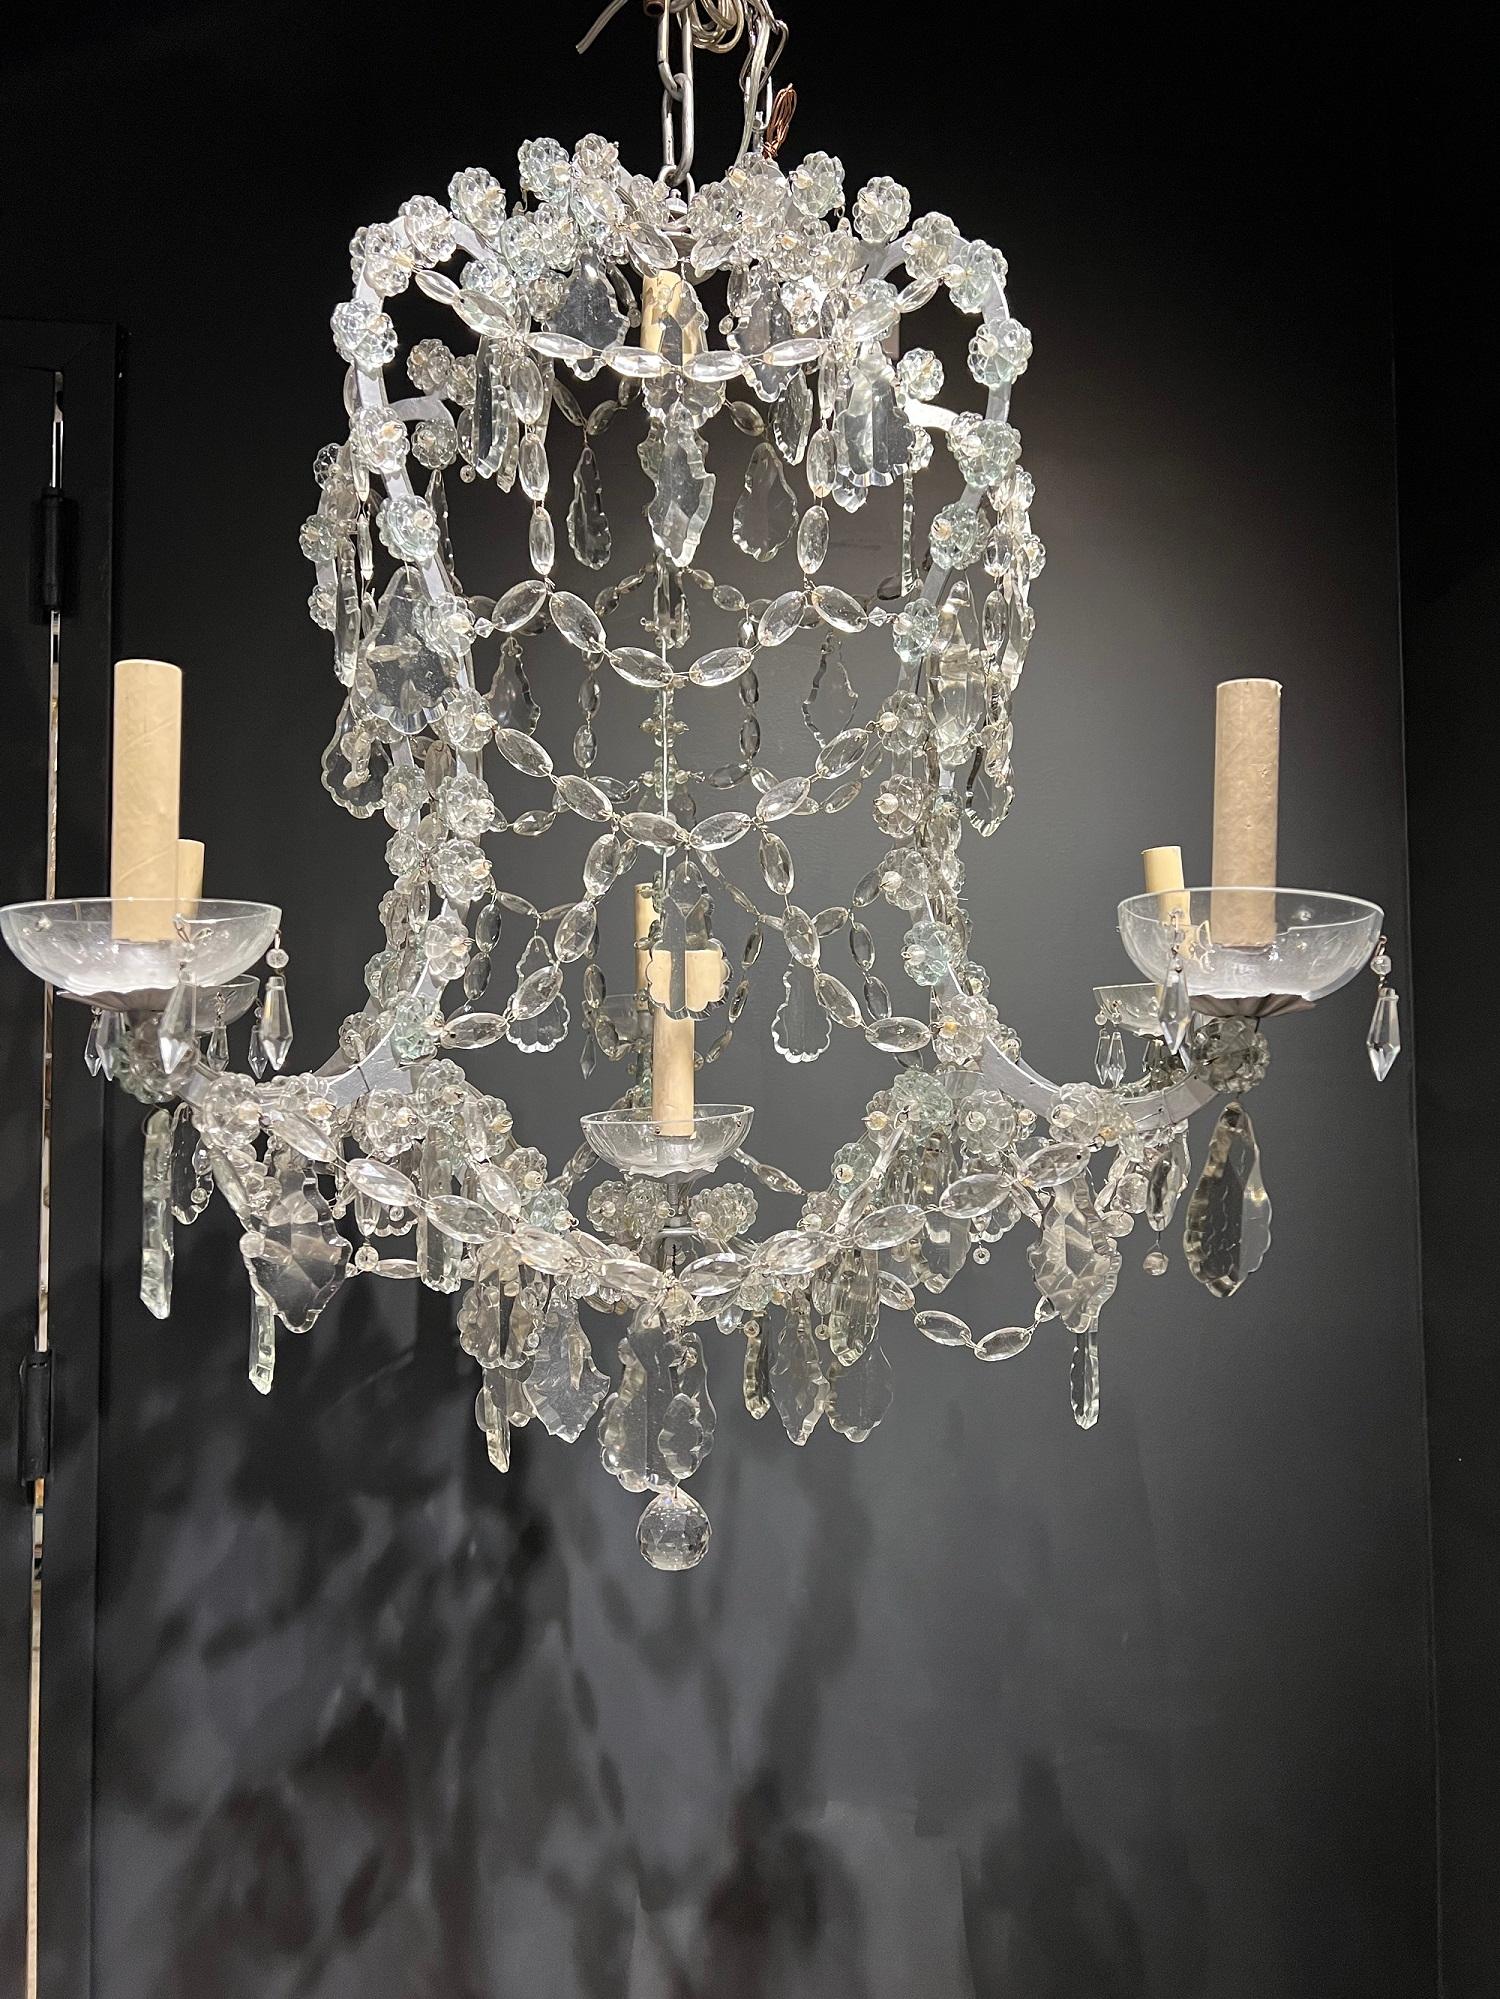 French Provincial 1920’s Fench Crystals Chandelier For Sale